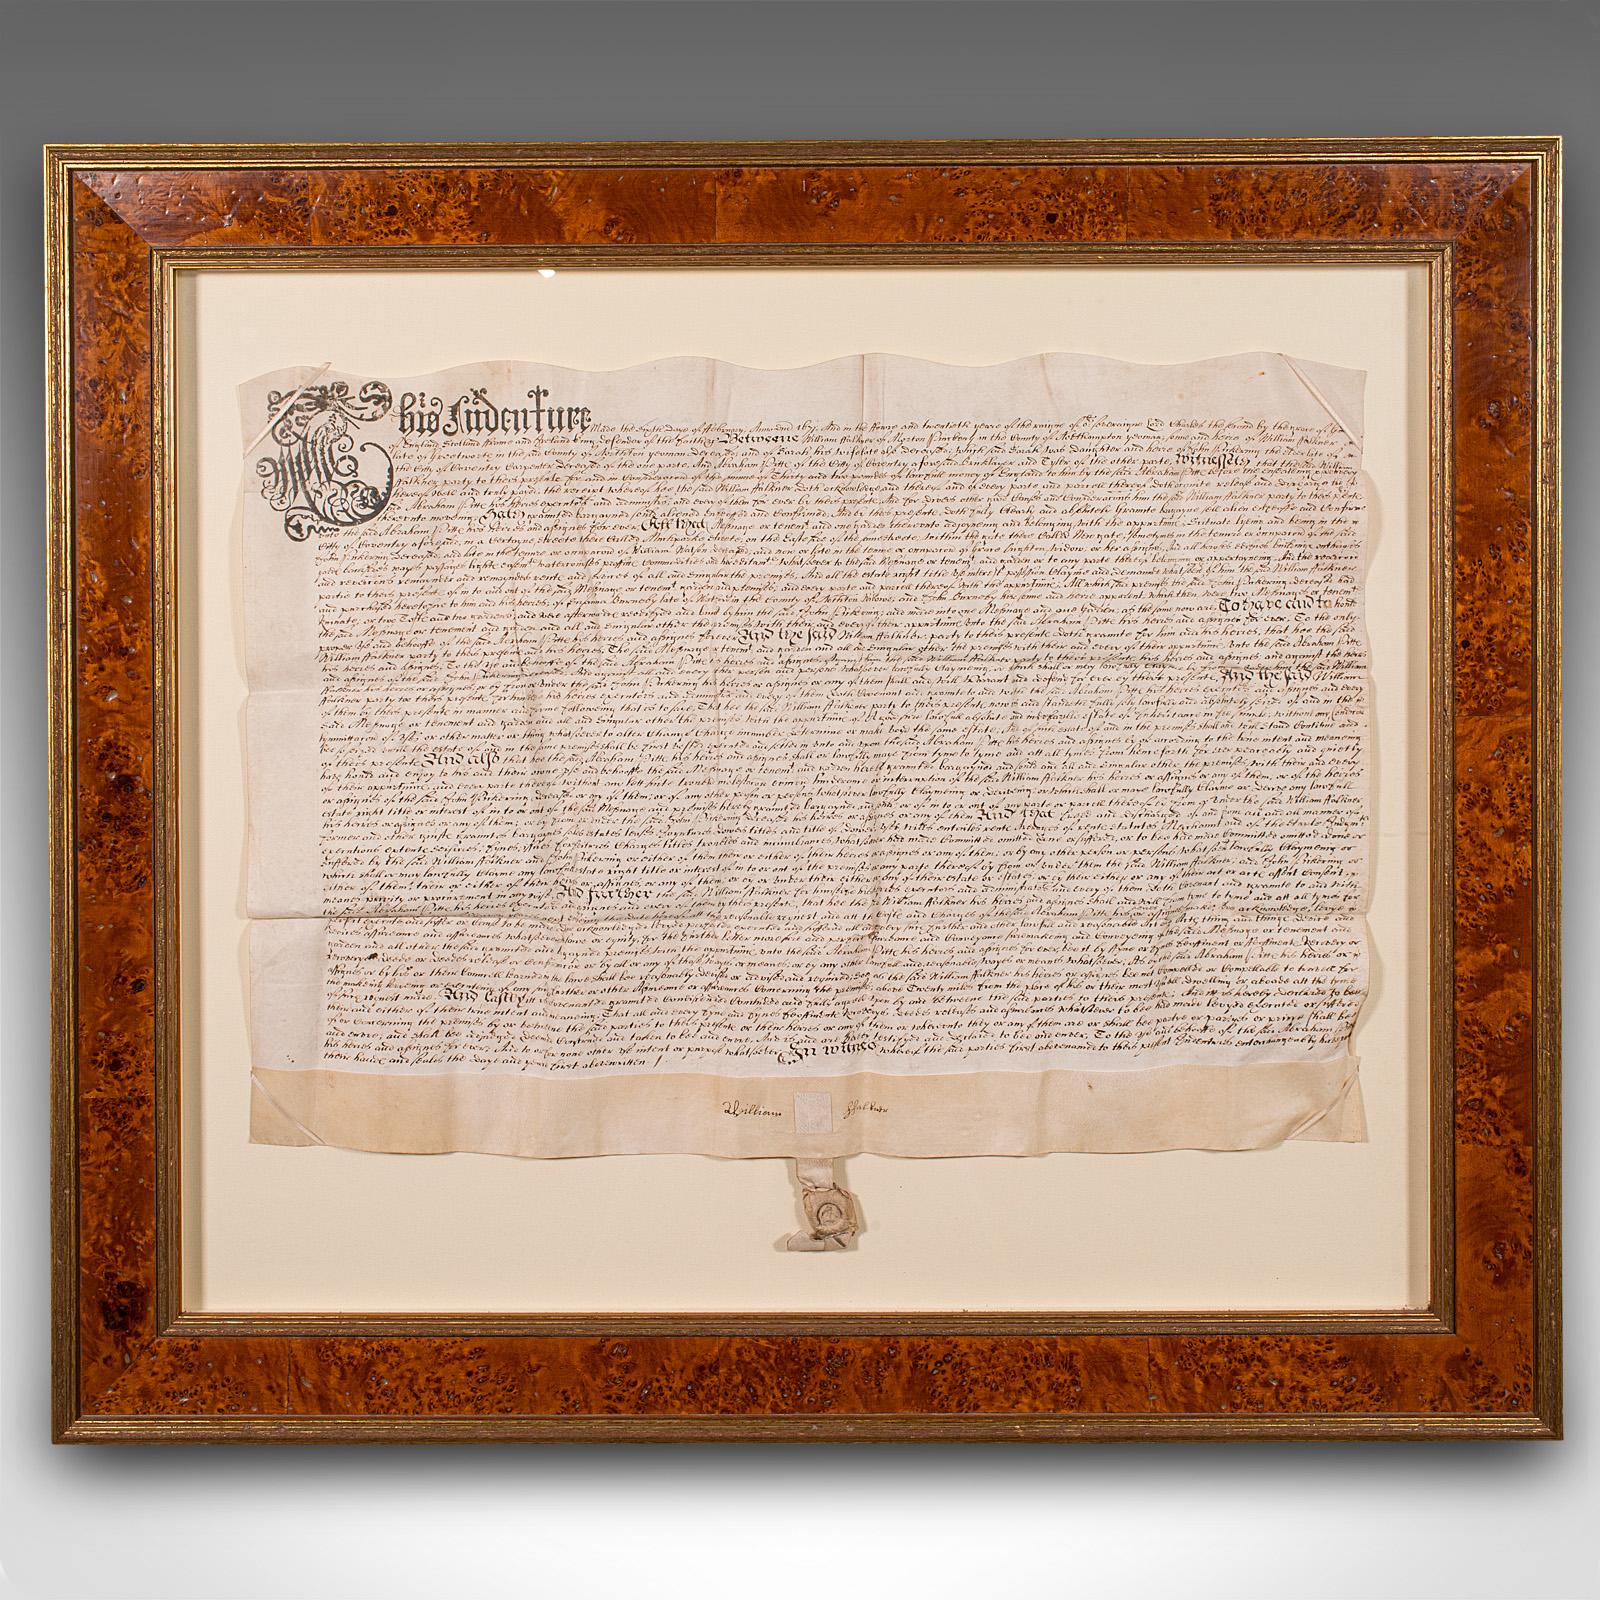 This is an antique framed indenture. An English, vellum document in modern frame, dating to the 17th century and later, dated to 1671.

Issued in three parts, indentures were legal documents cut with wavy edges, meaning two copies could be matched